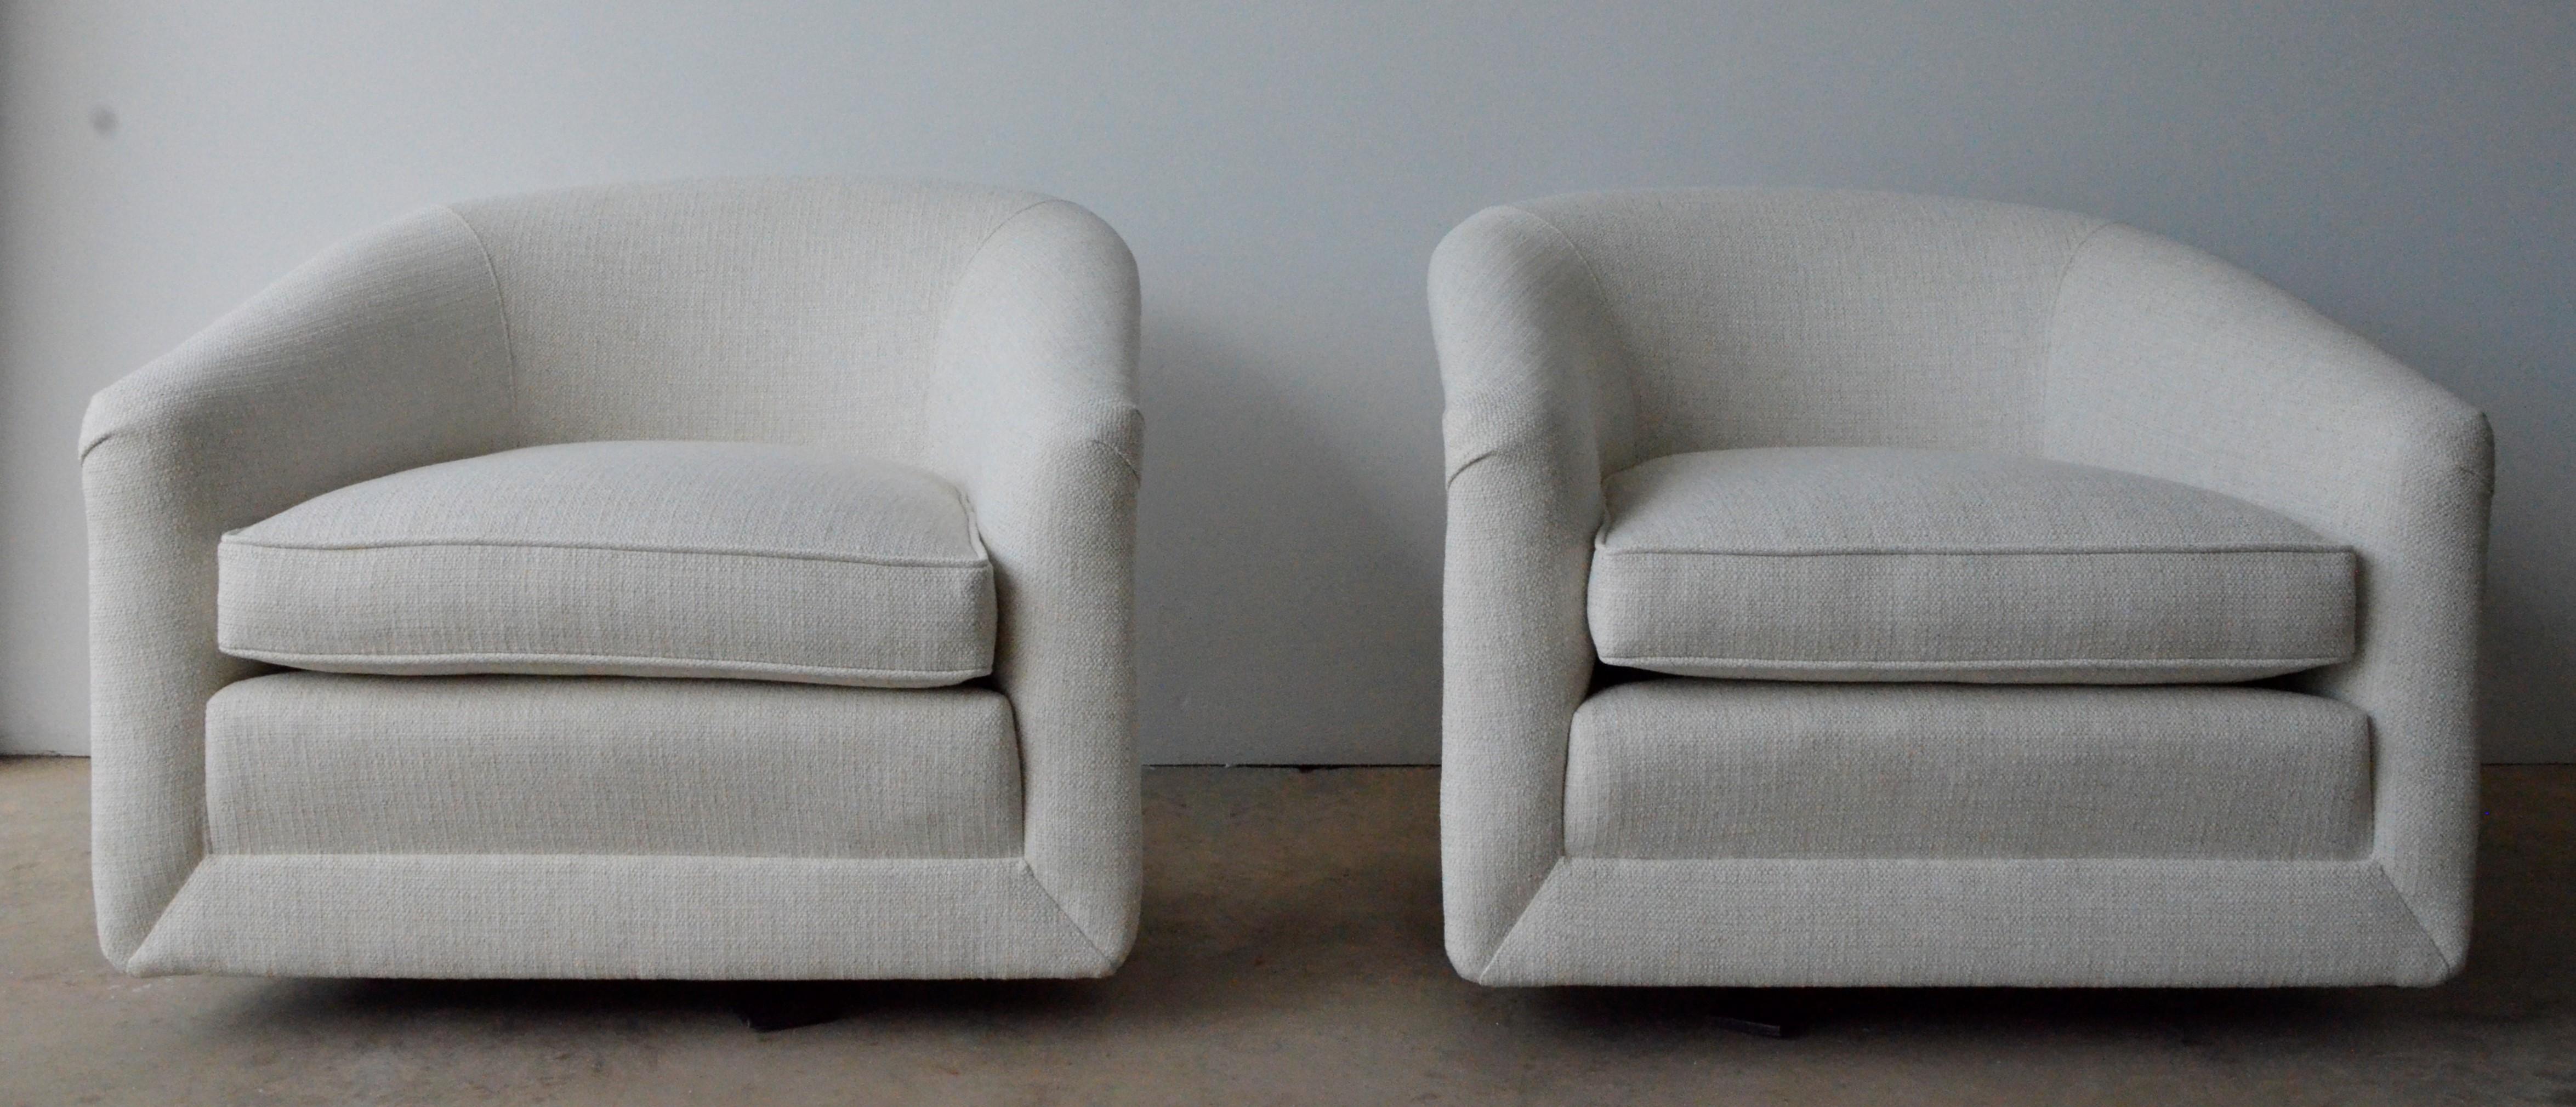 Pair of Milo Baughman Style New White Upholstery Swivel Chairs with Back Cushion For Sale 2